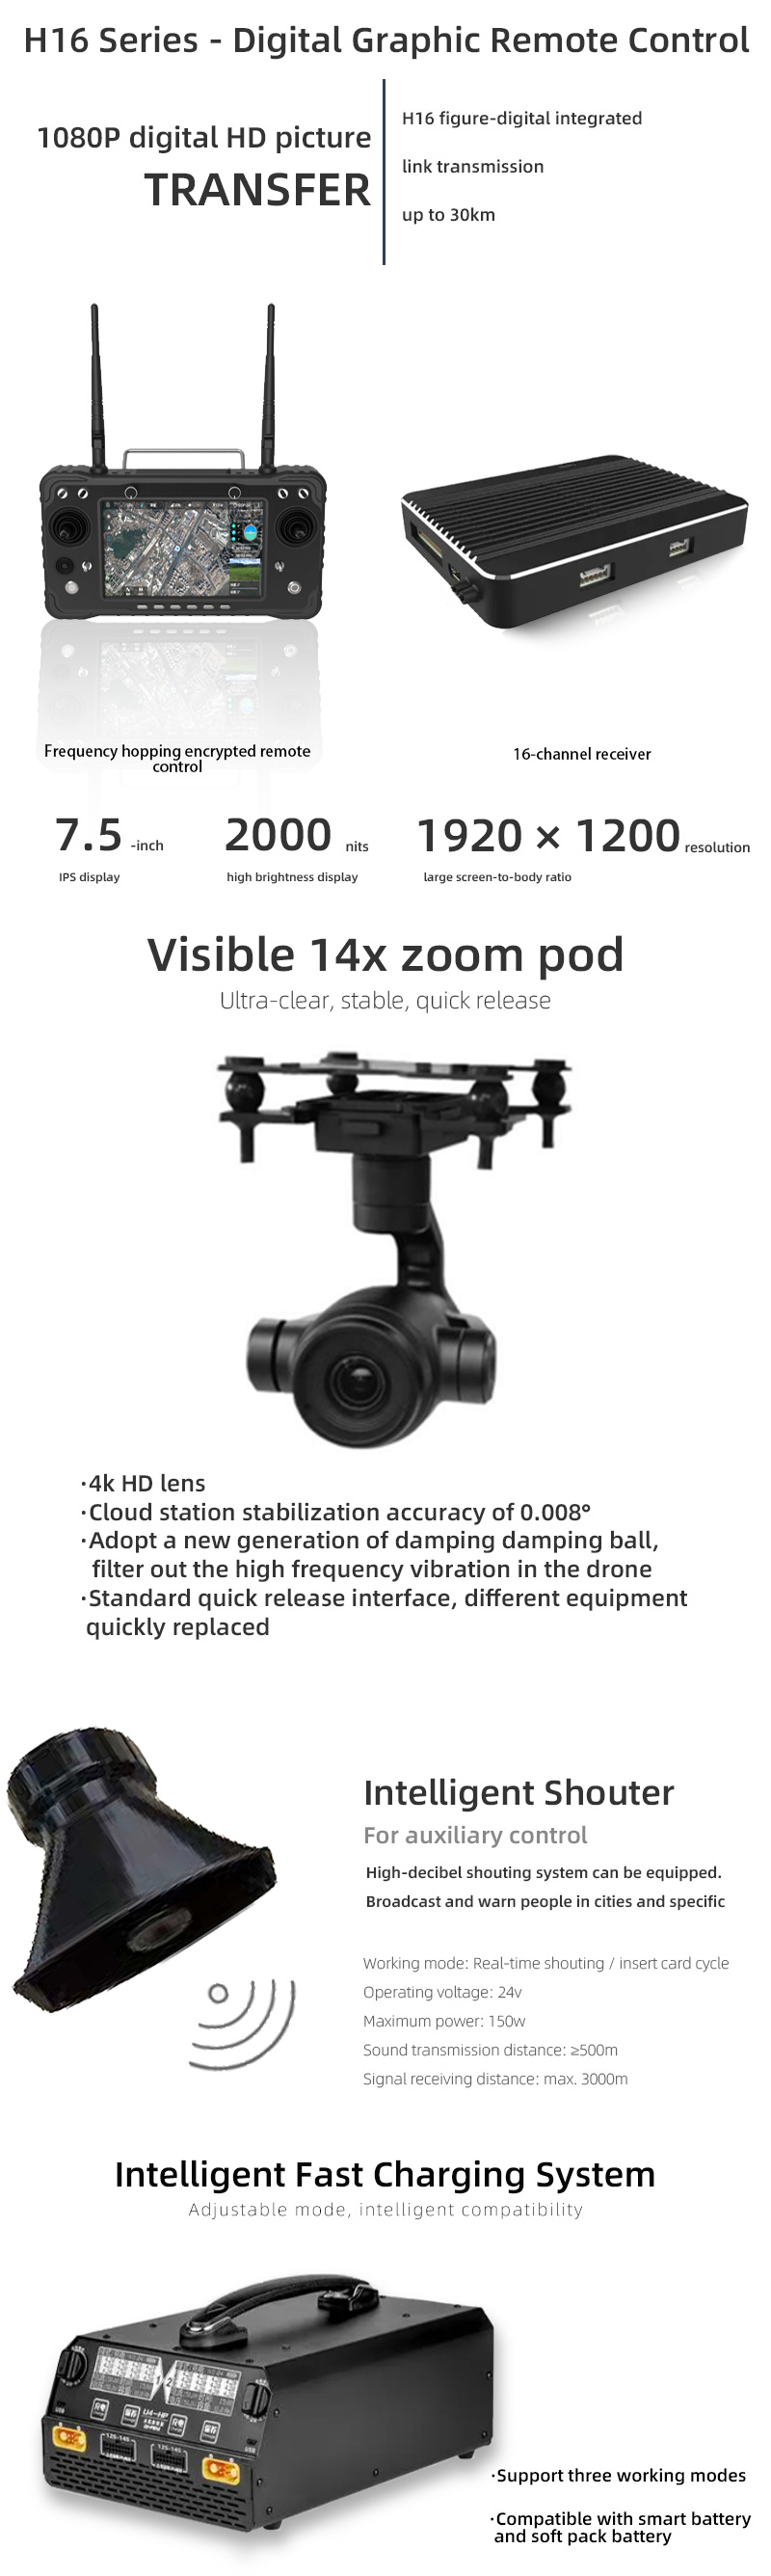 Factory 1.5kg Payload Optional Multi-Tasking Loads Industrial Mini Roof Chimney Inspection Drone